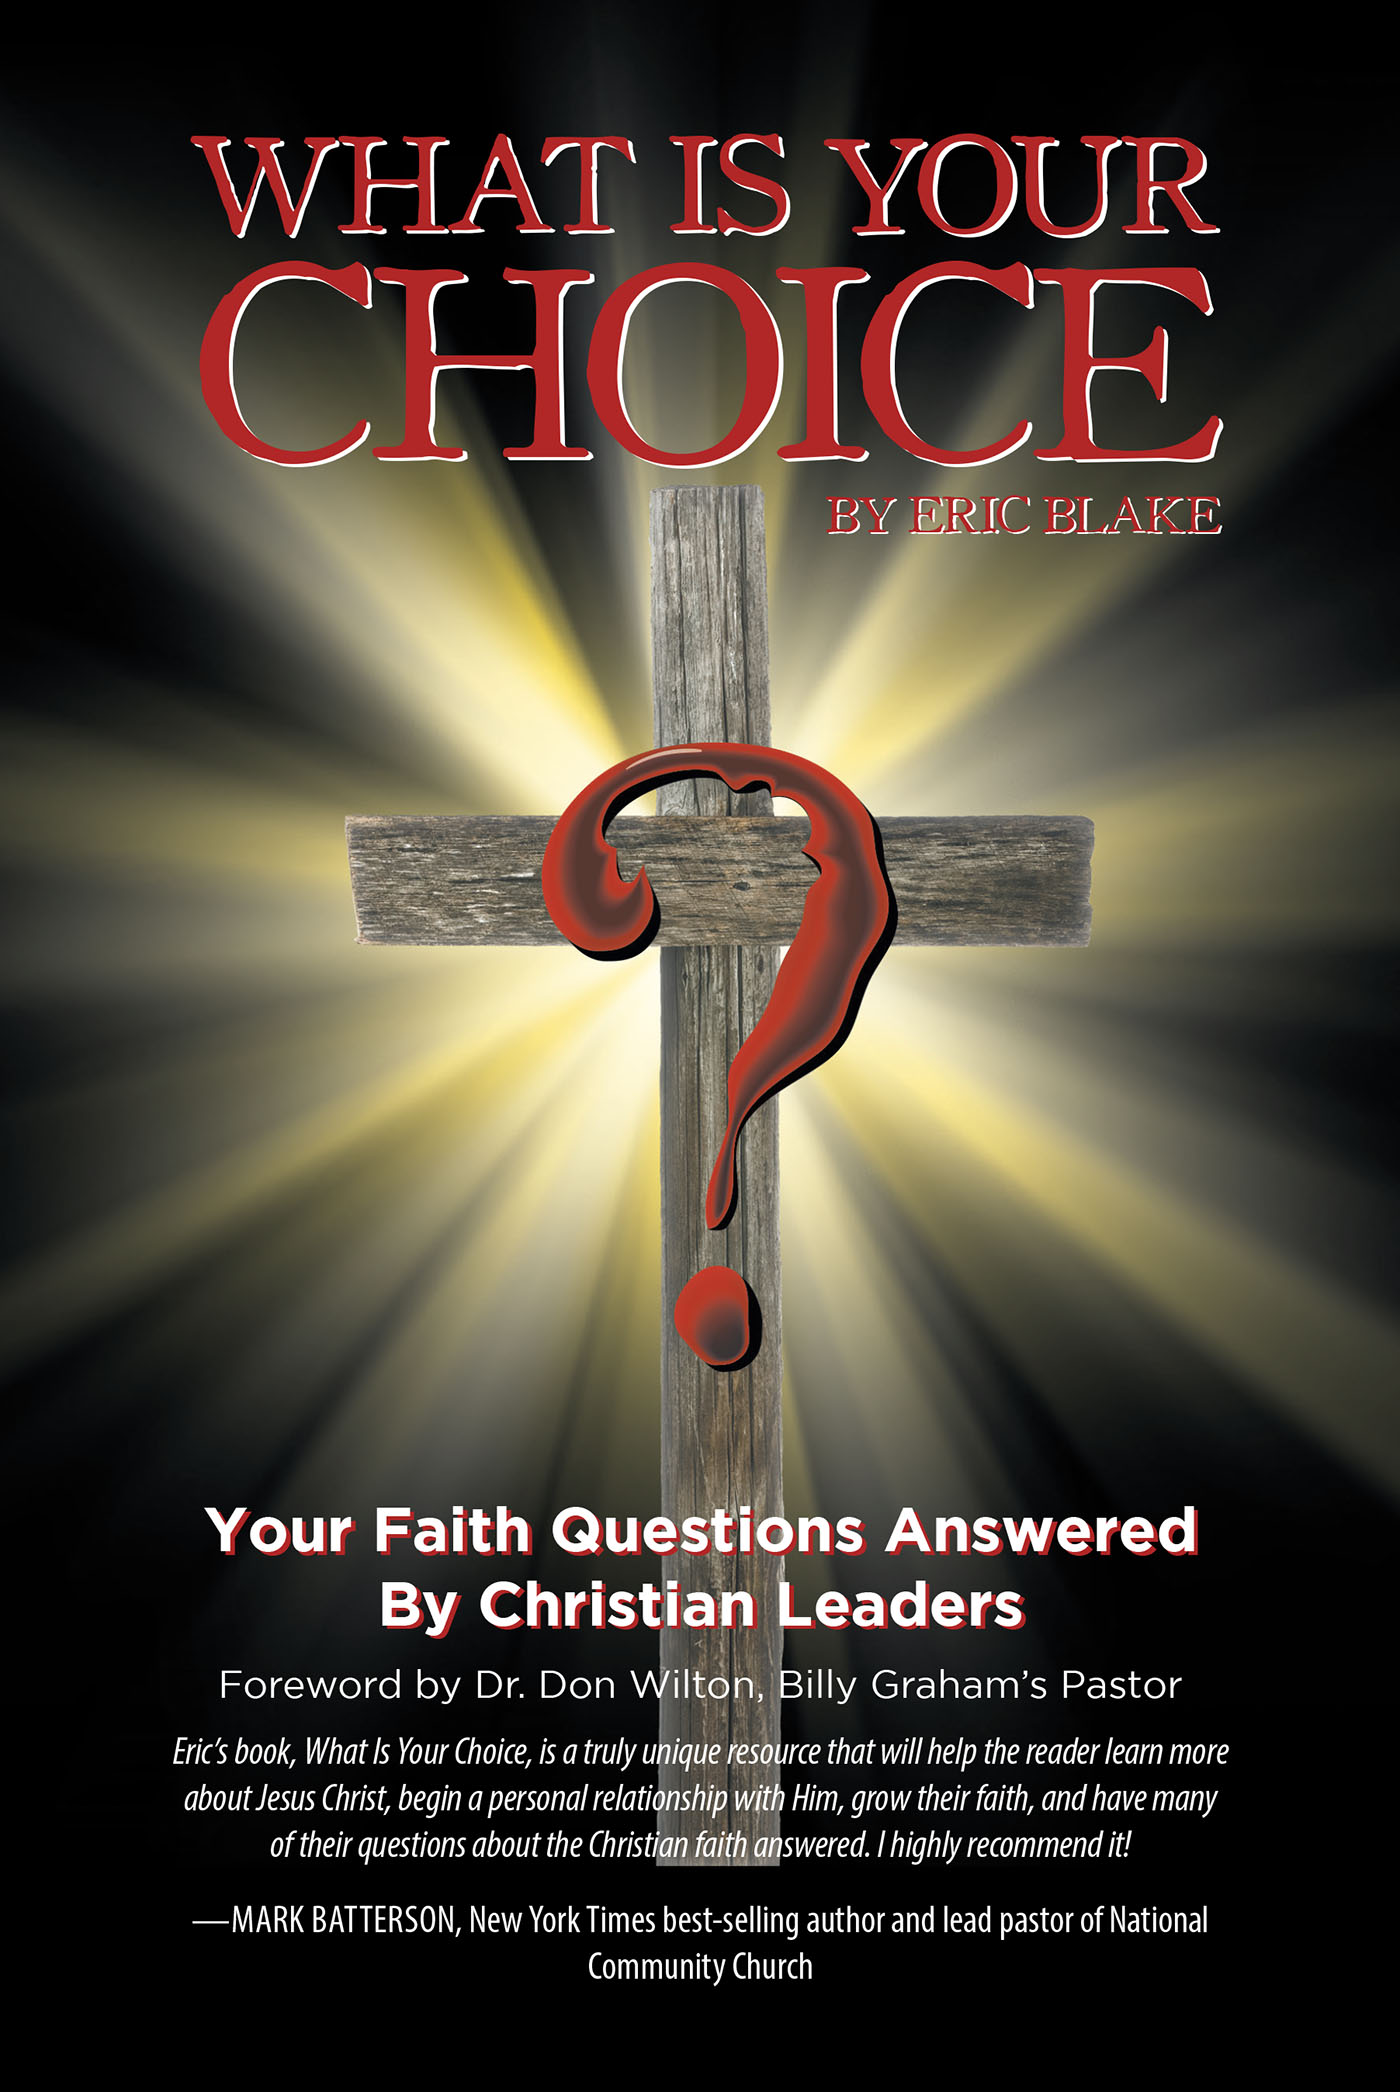 Eric Blake’s Newly Released "What Is Your Choice?" is an Engaging and Uplifting Message of God’s Abiding Grace and Promise of Salvation